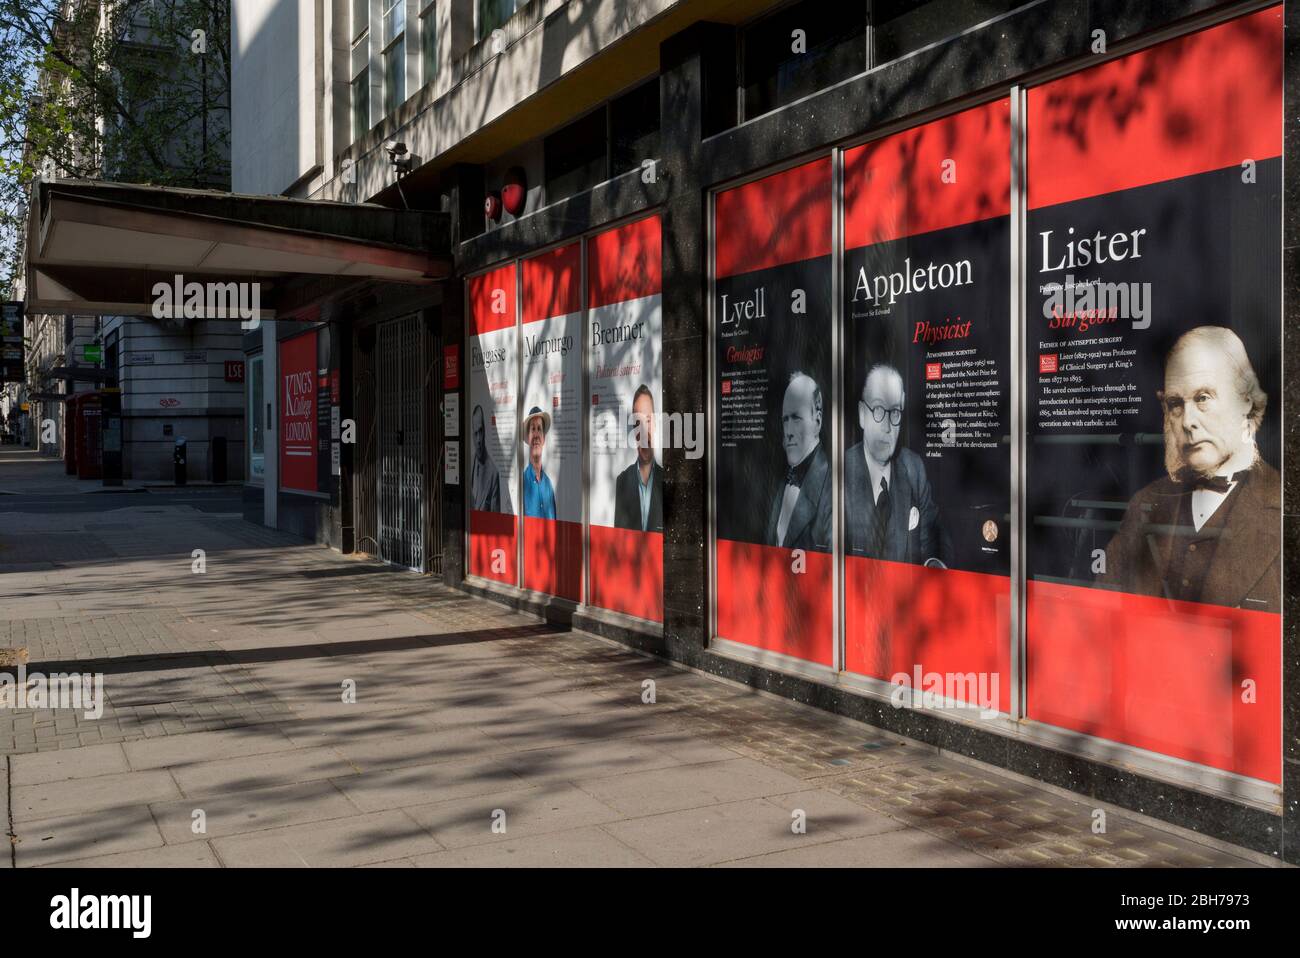 As the UK government's lockdown restrictions during the Coronavirus pandemic continues, and number of UK reported cases rose to 138,078 with a total now of 18,738 deaths, the faces and biographies of famous alumni outside one of UCL's sites on Kingsway, on 23rd April 2020, in London, England. King's College London is a public research university located in London, United Kingdom, and a founding college and member institution of the federal University of London. Stock Photo